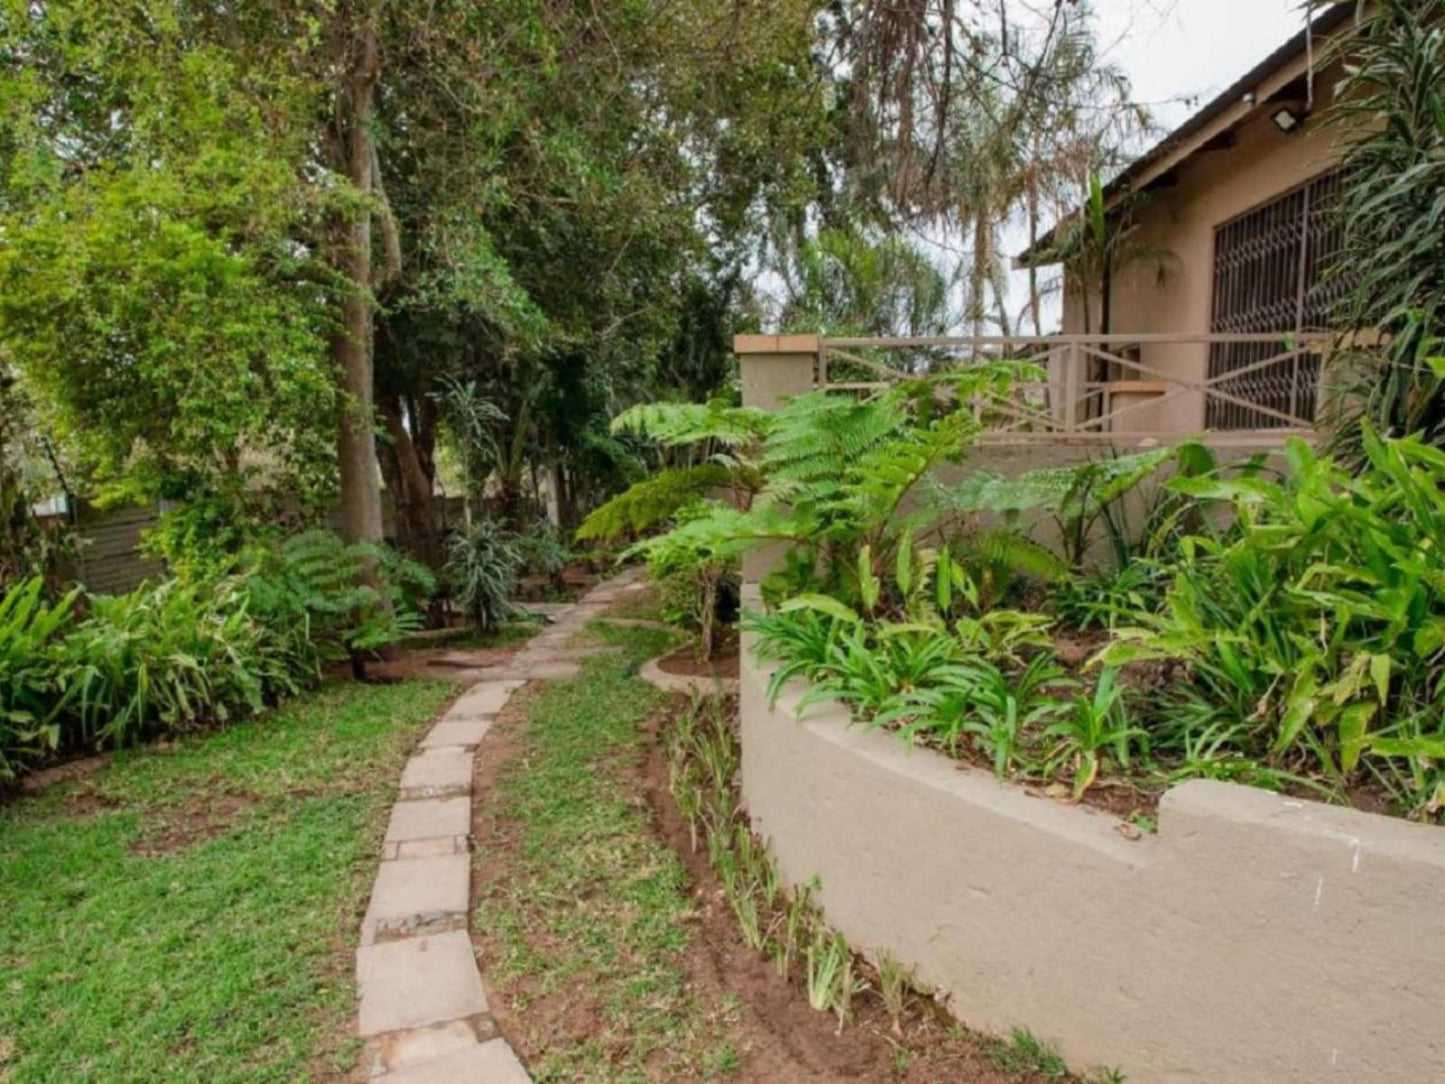 4 Gazelle Guesthouse The Rest 454 Jt Nelspruit Mpumalanga South Africa House, Building, Architecture, Palm Tree, Plant, Nature, Wood, Garden